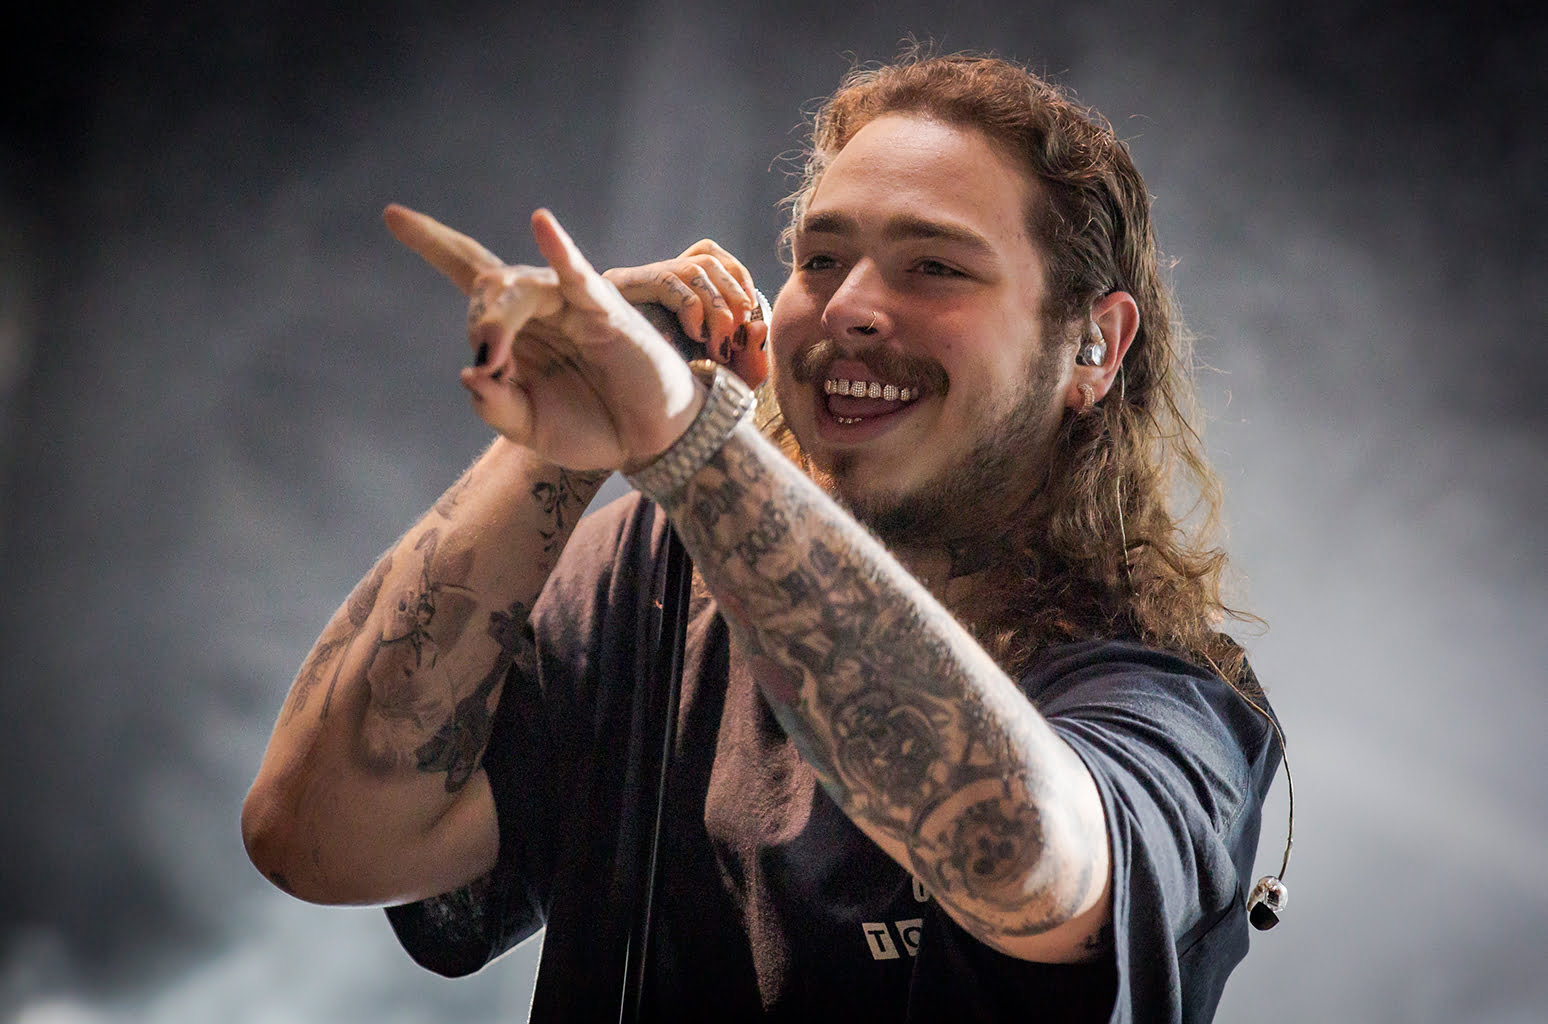 Listen to Post Malone and Roddy Ricch's new song "Cooped Up"